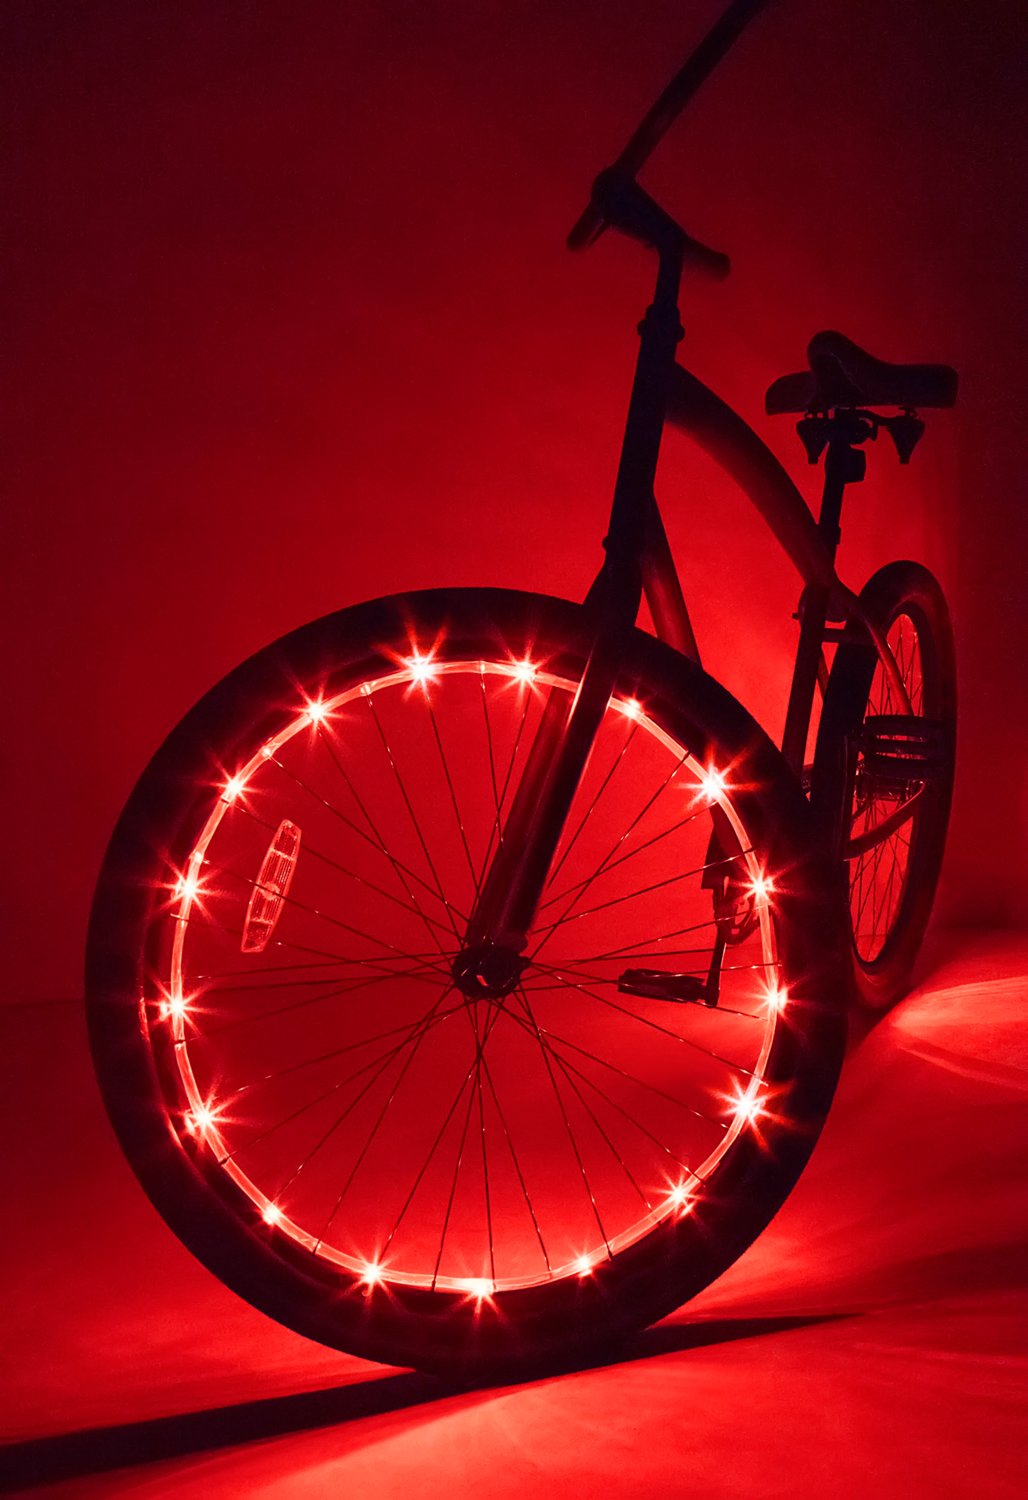 bike lights powered by pedaling